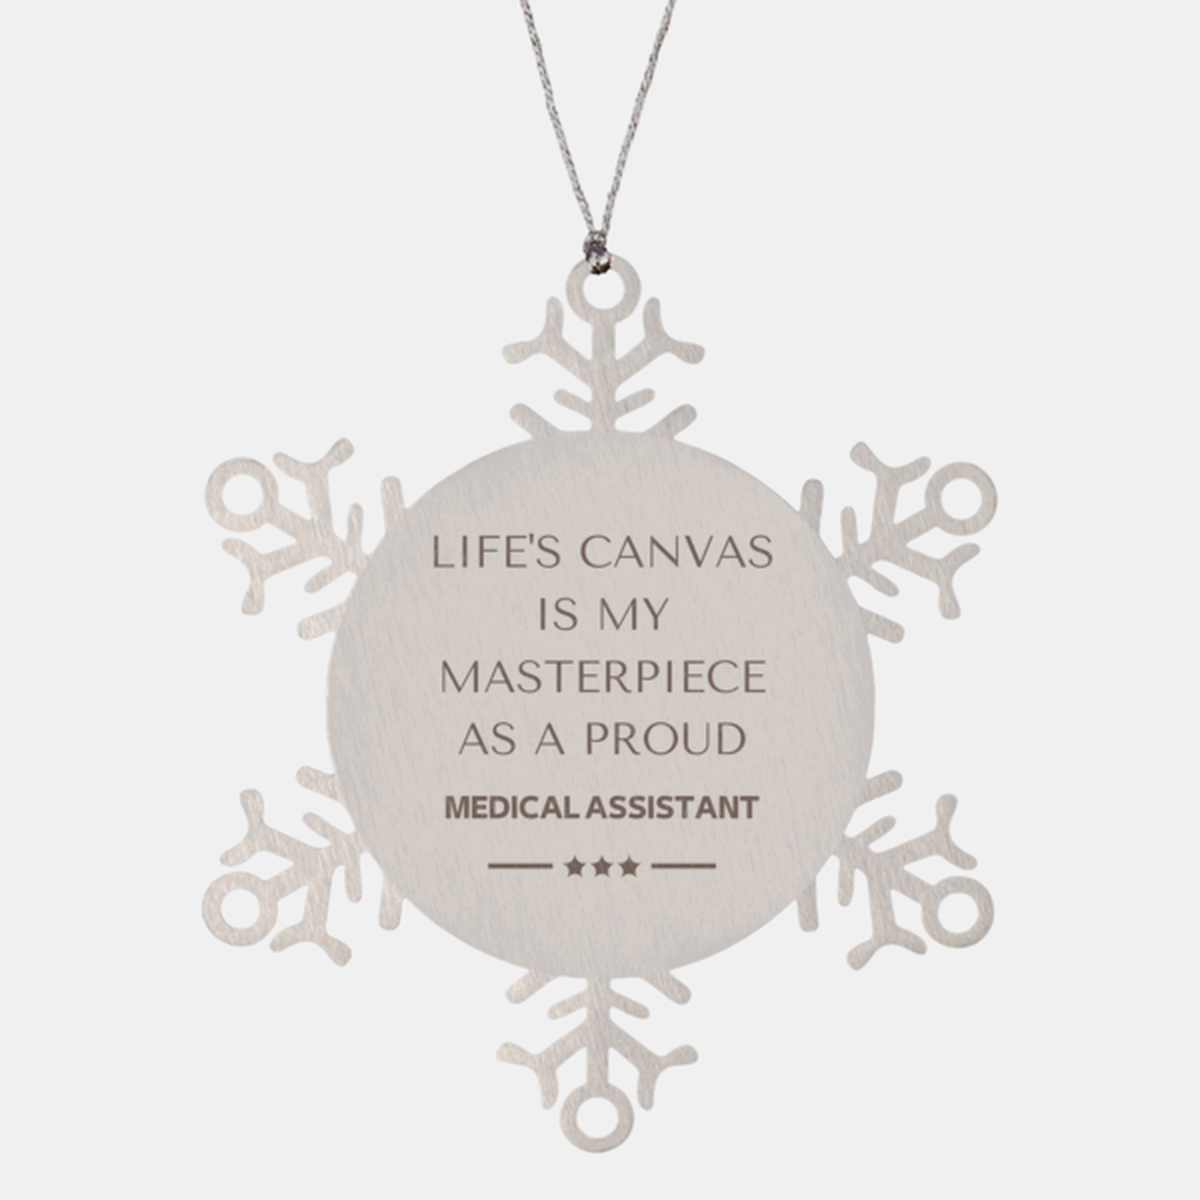 Proud Medical Assistant Gifts, Life's canvas is my masterpiece, Epic Birthday Christmas Unique Snowflake Ornament For Medical Assistant, Coworkers, Men, Women, Friends